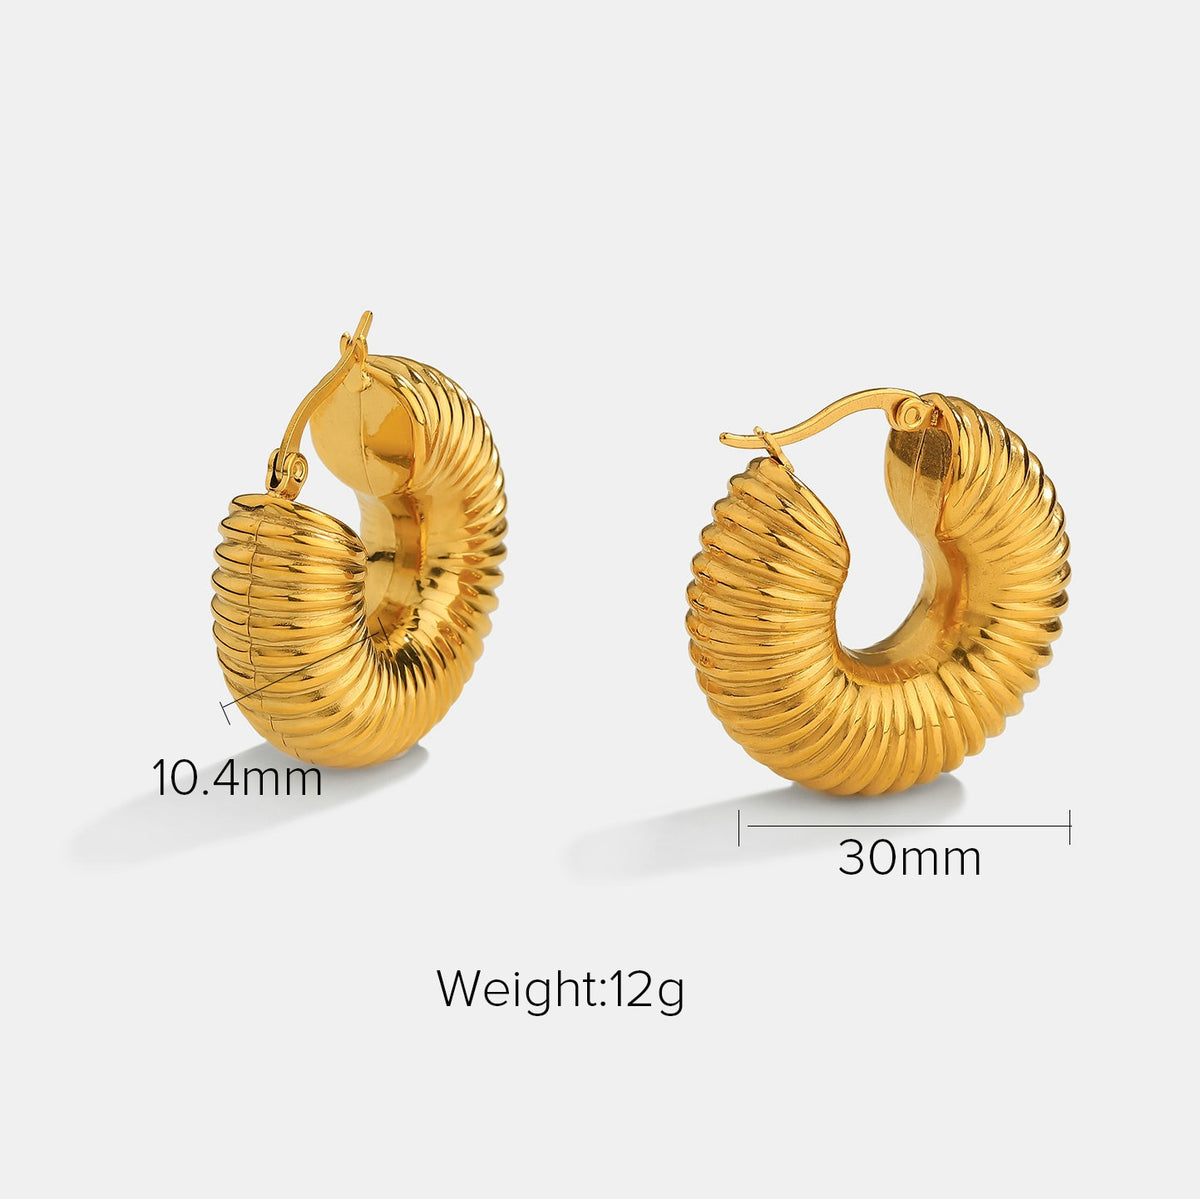 Stylish 18K Gold Plated Stainless Steel Hoop Earrings For Women Unique Snail Shell Hollow Earrings Jewelry Accessories